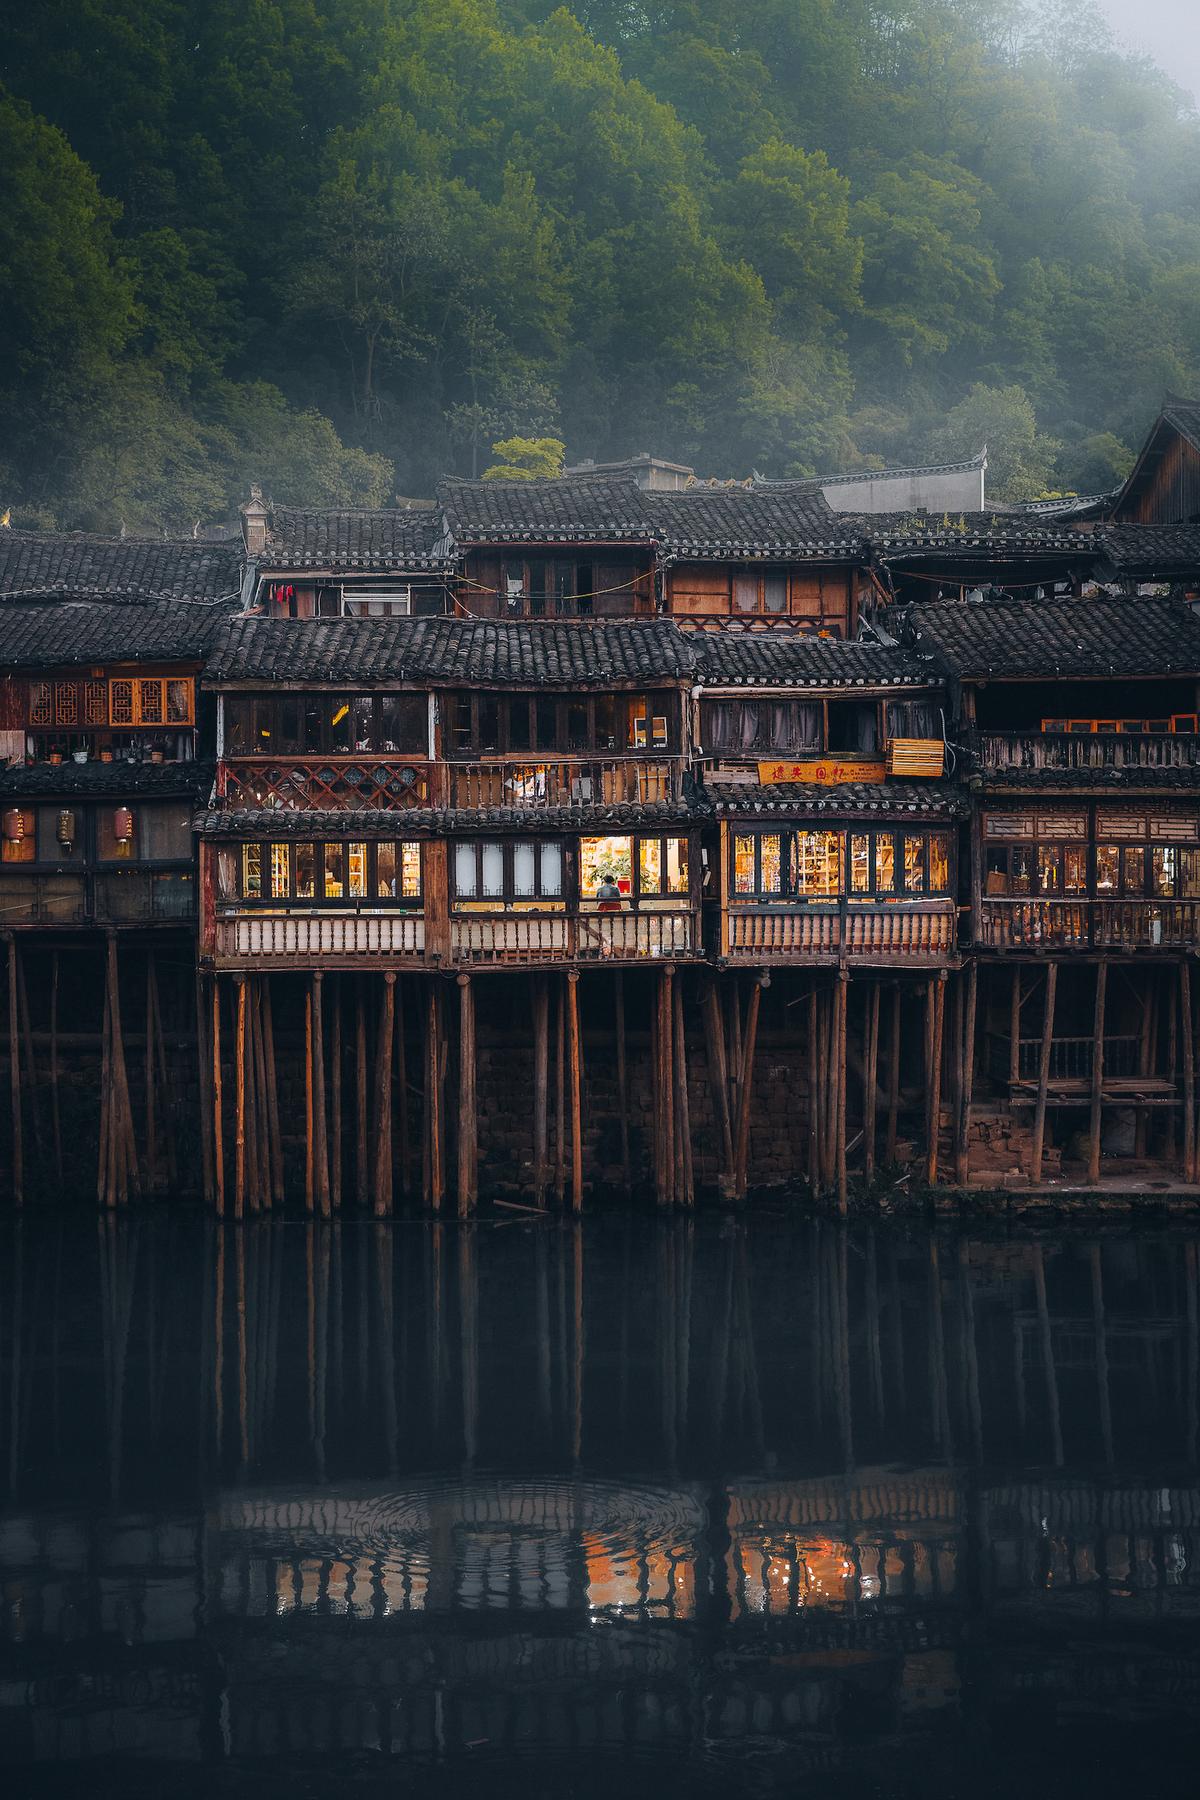 World History winner: Luke Stackpoole–Fenghuang Ancient Town, China. (Courtesy of Luke Stackpoole)